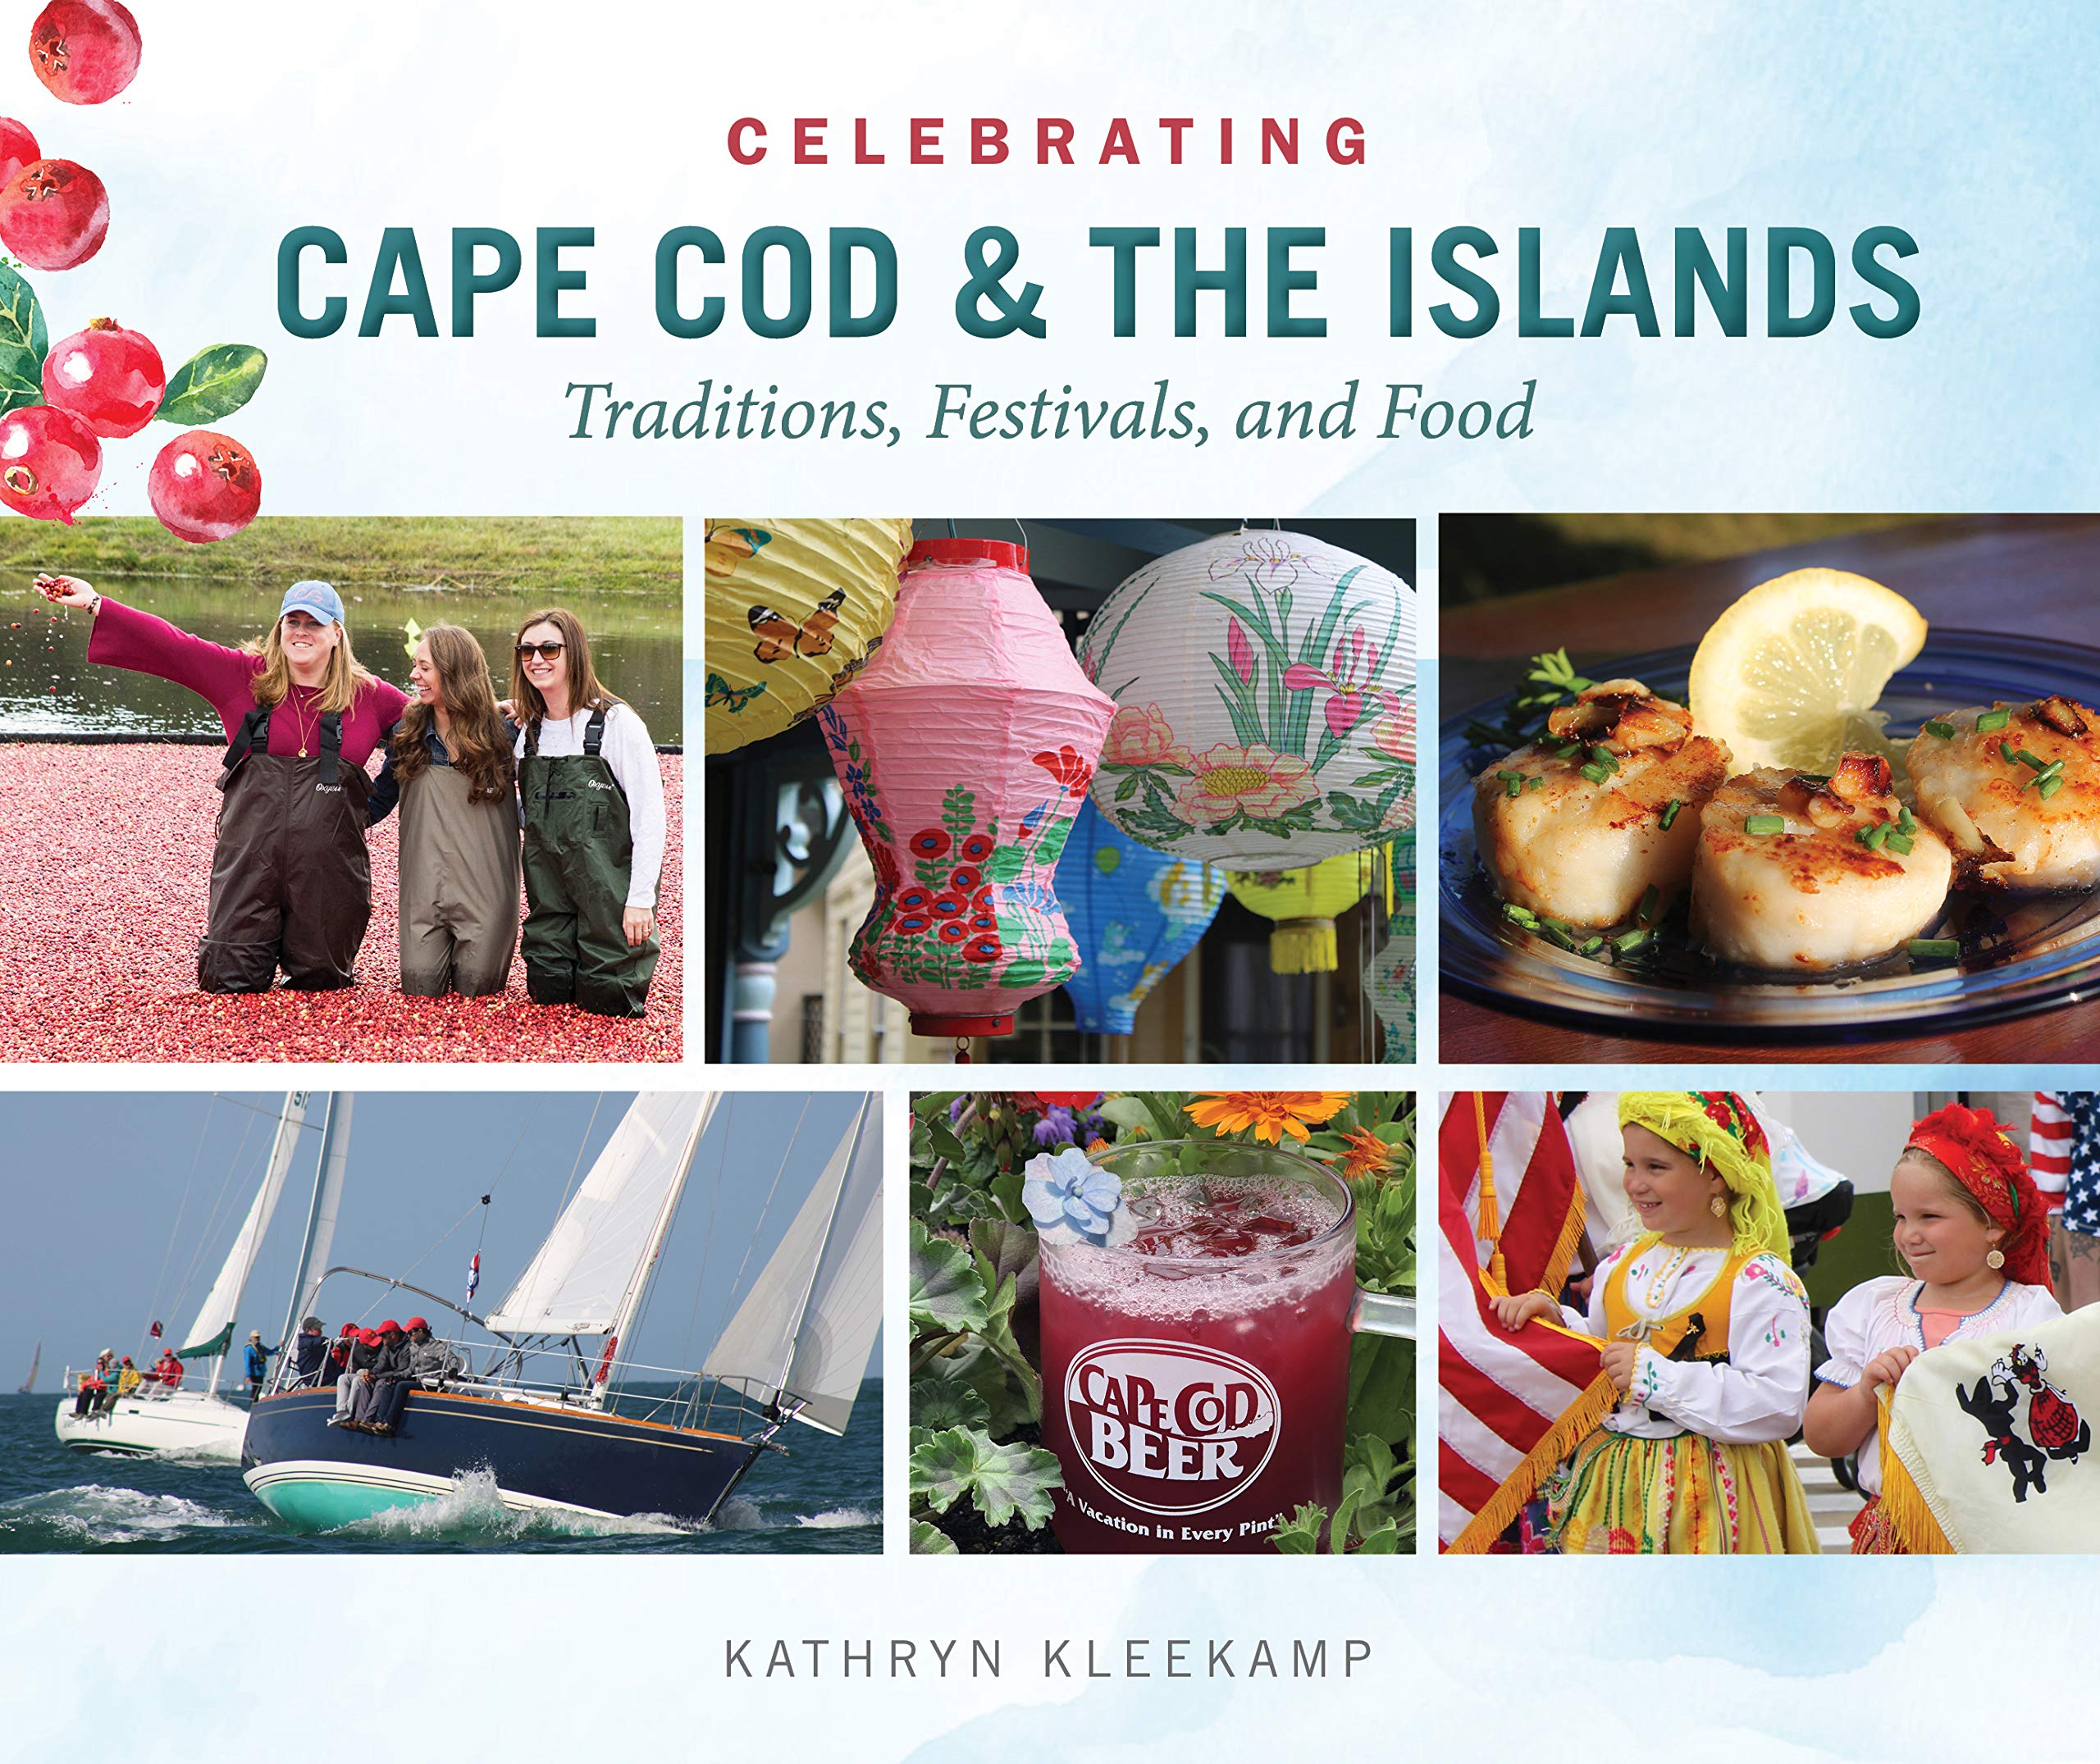 Celebrating Cape Cod & the Islands: Traditions, Festivals, and Food